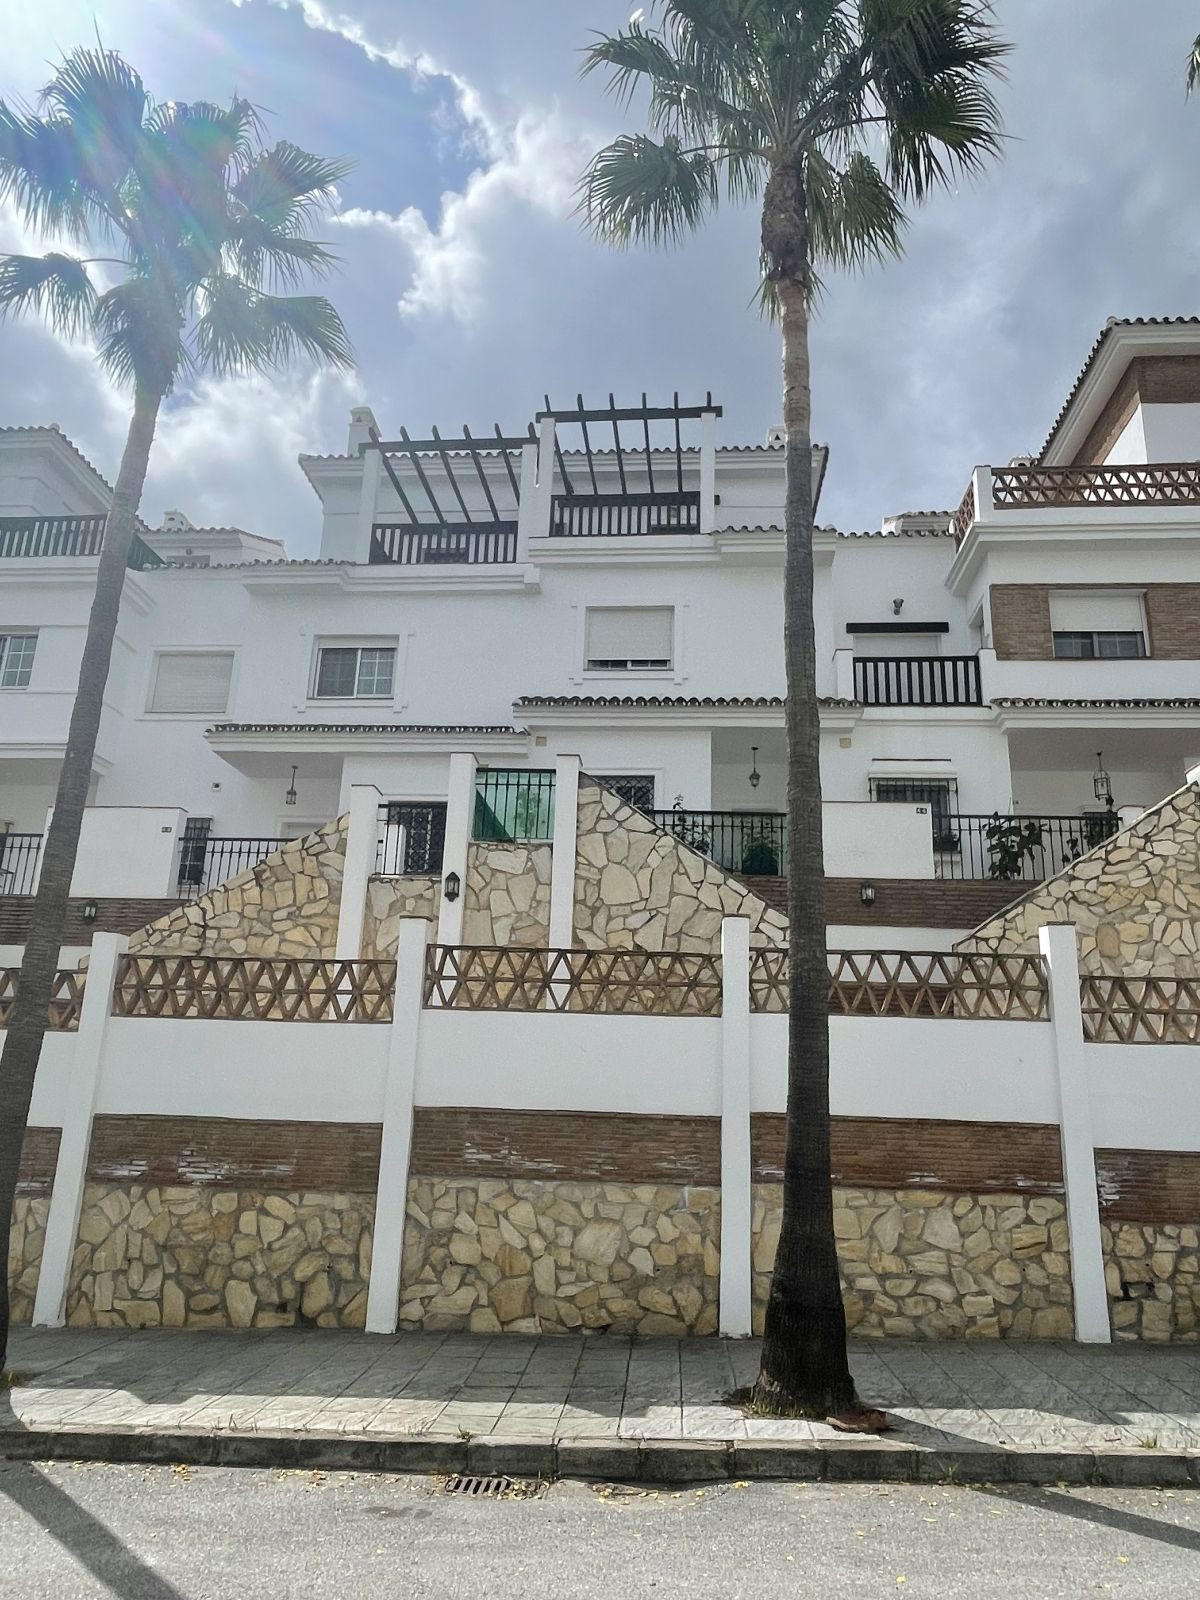 3 Bedroom Townhouse For Sale Lauro Golf, Costa del Sol - HP4709584